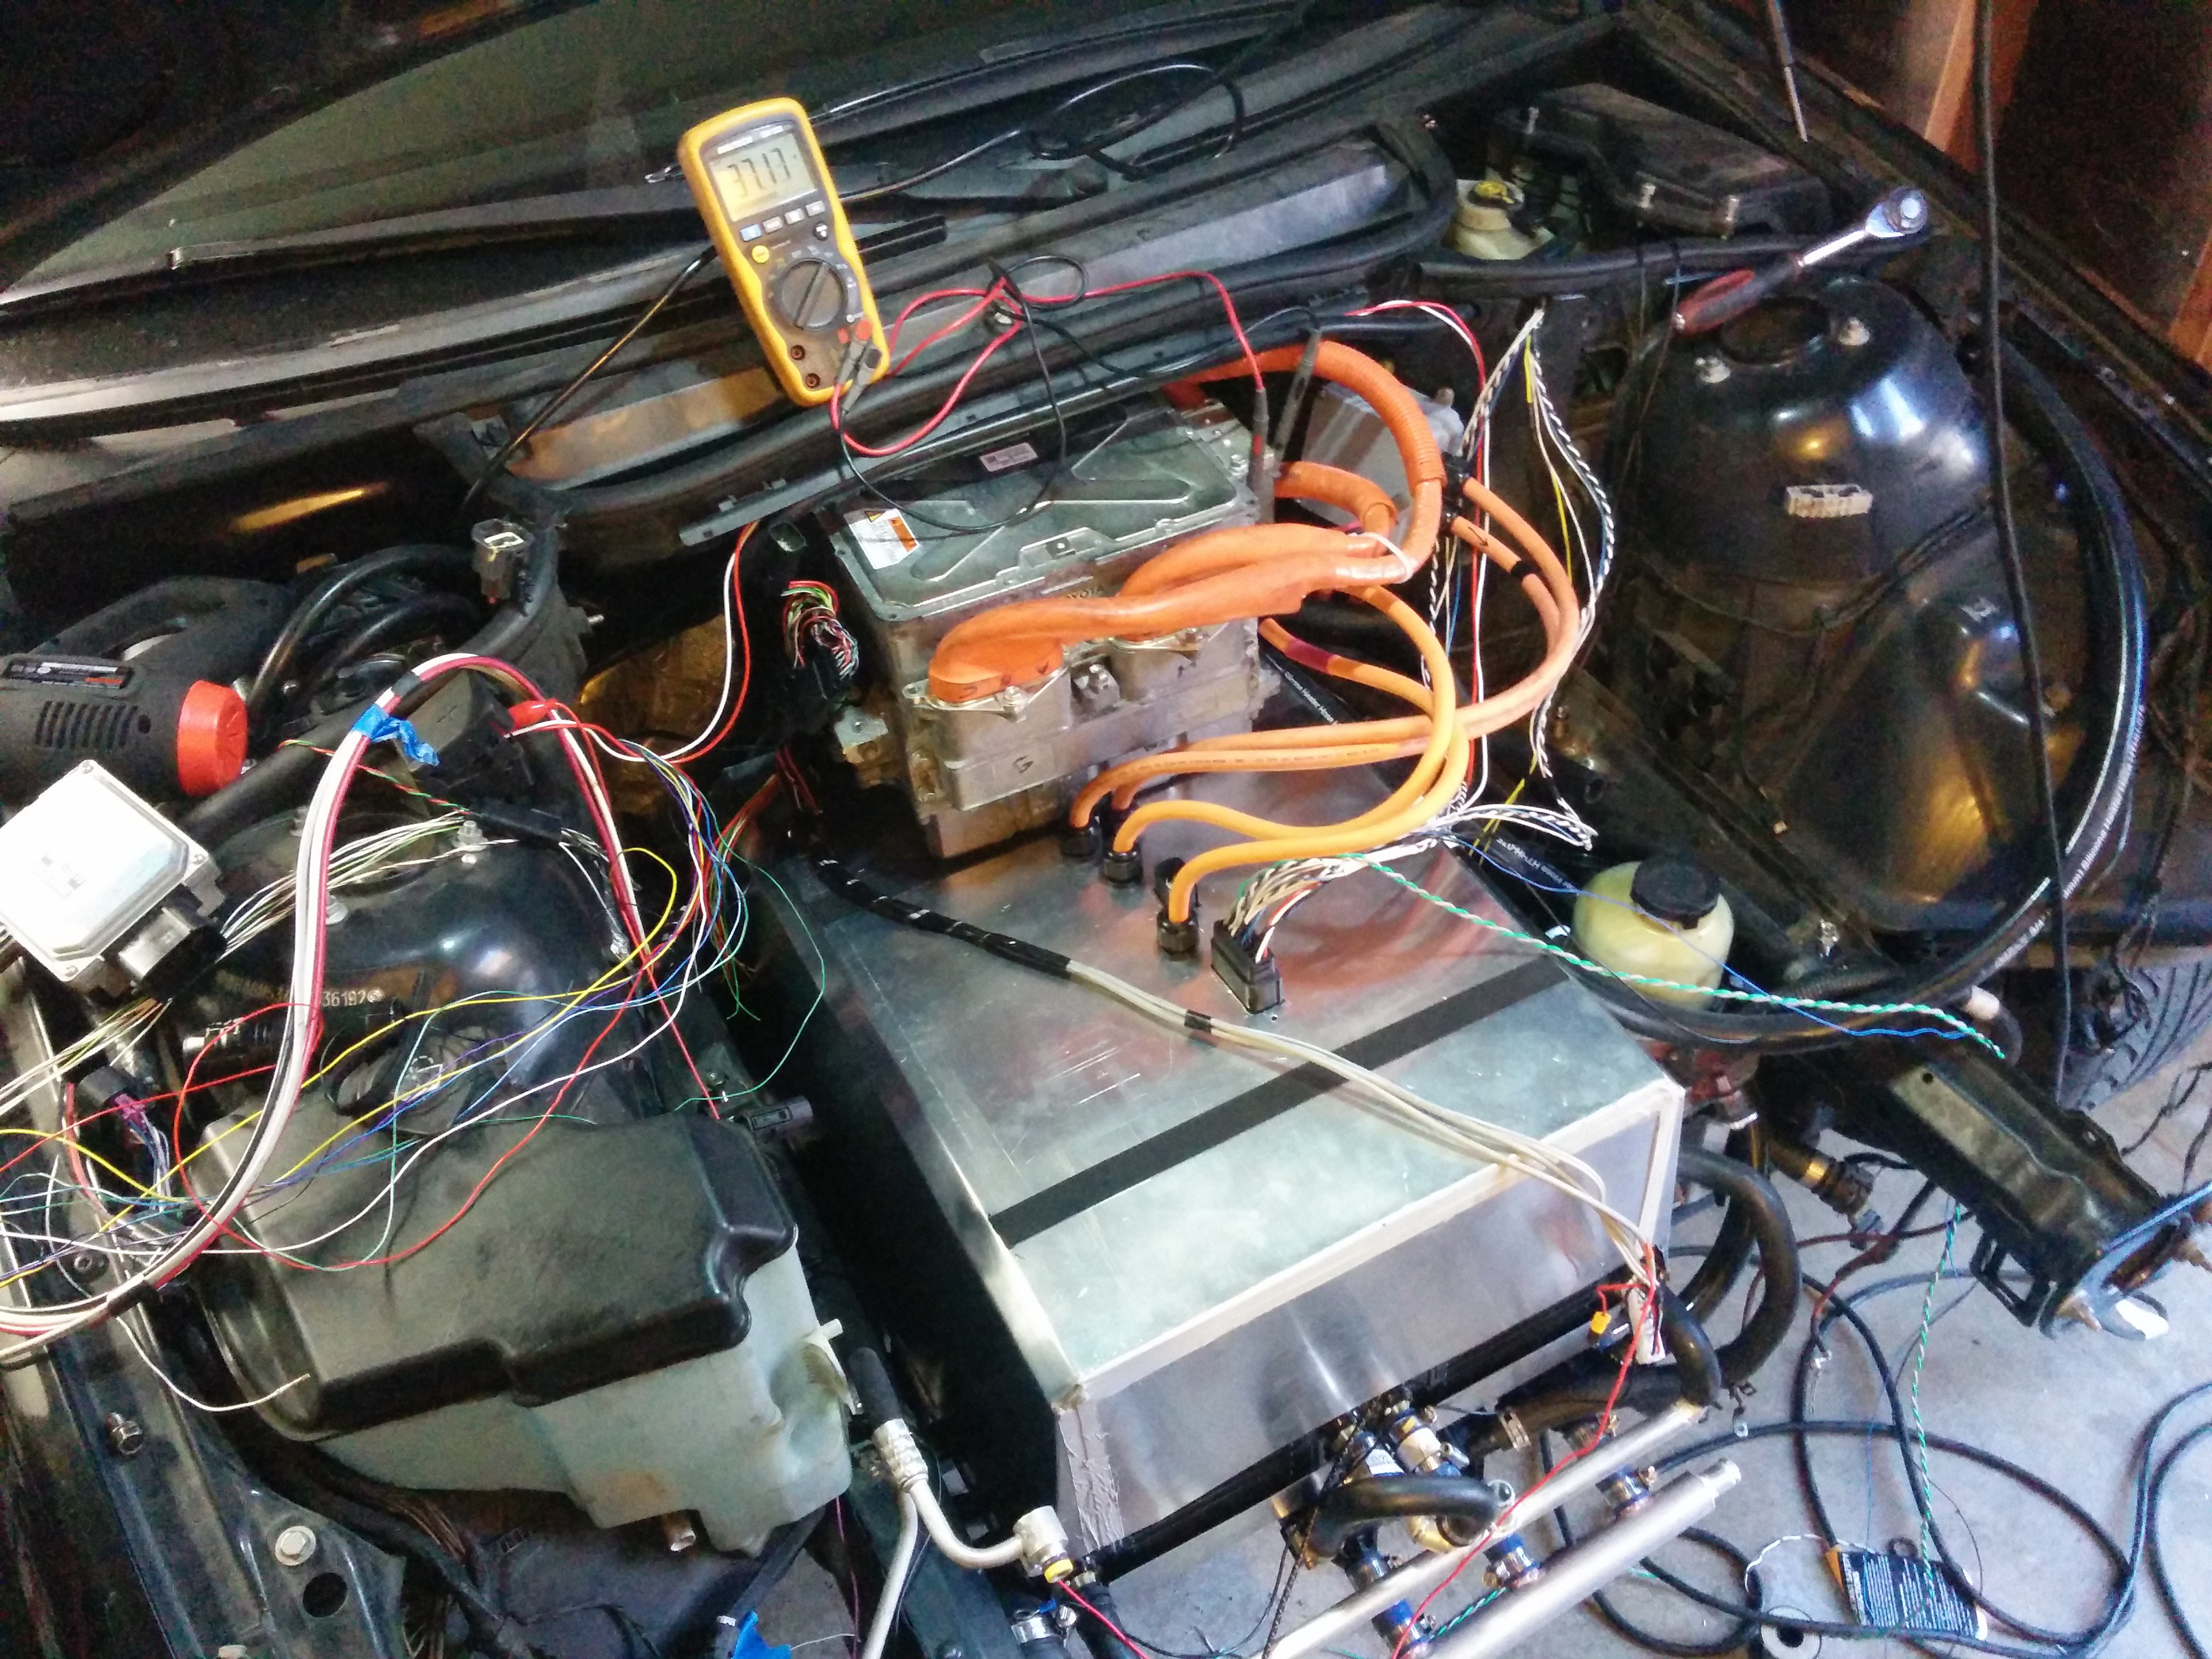 DIY Electric Vehicle from Recycled Parts Hackaday.io